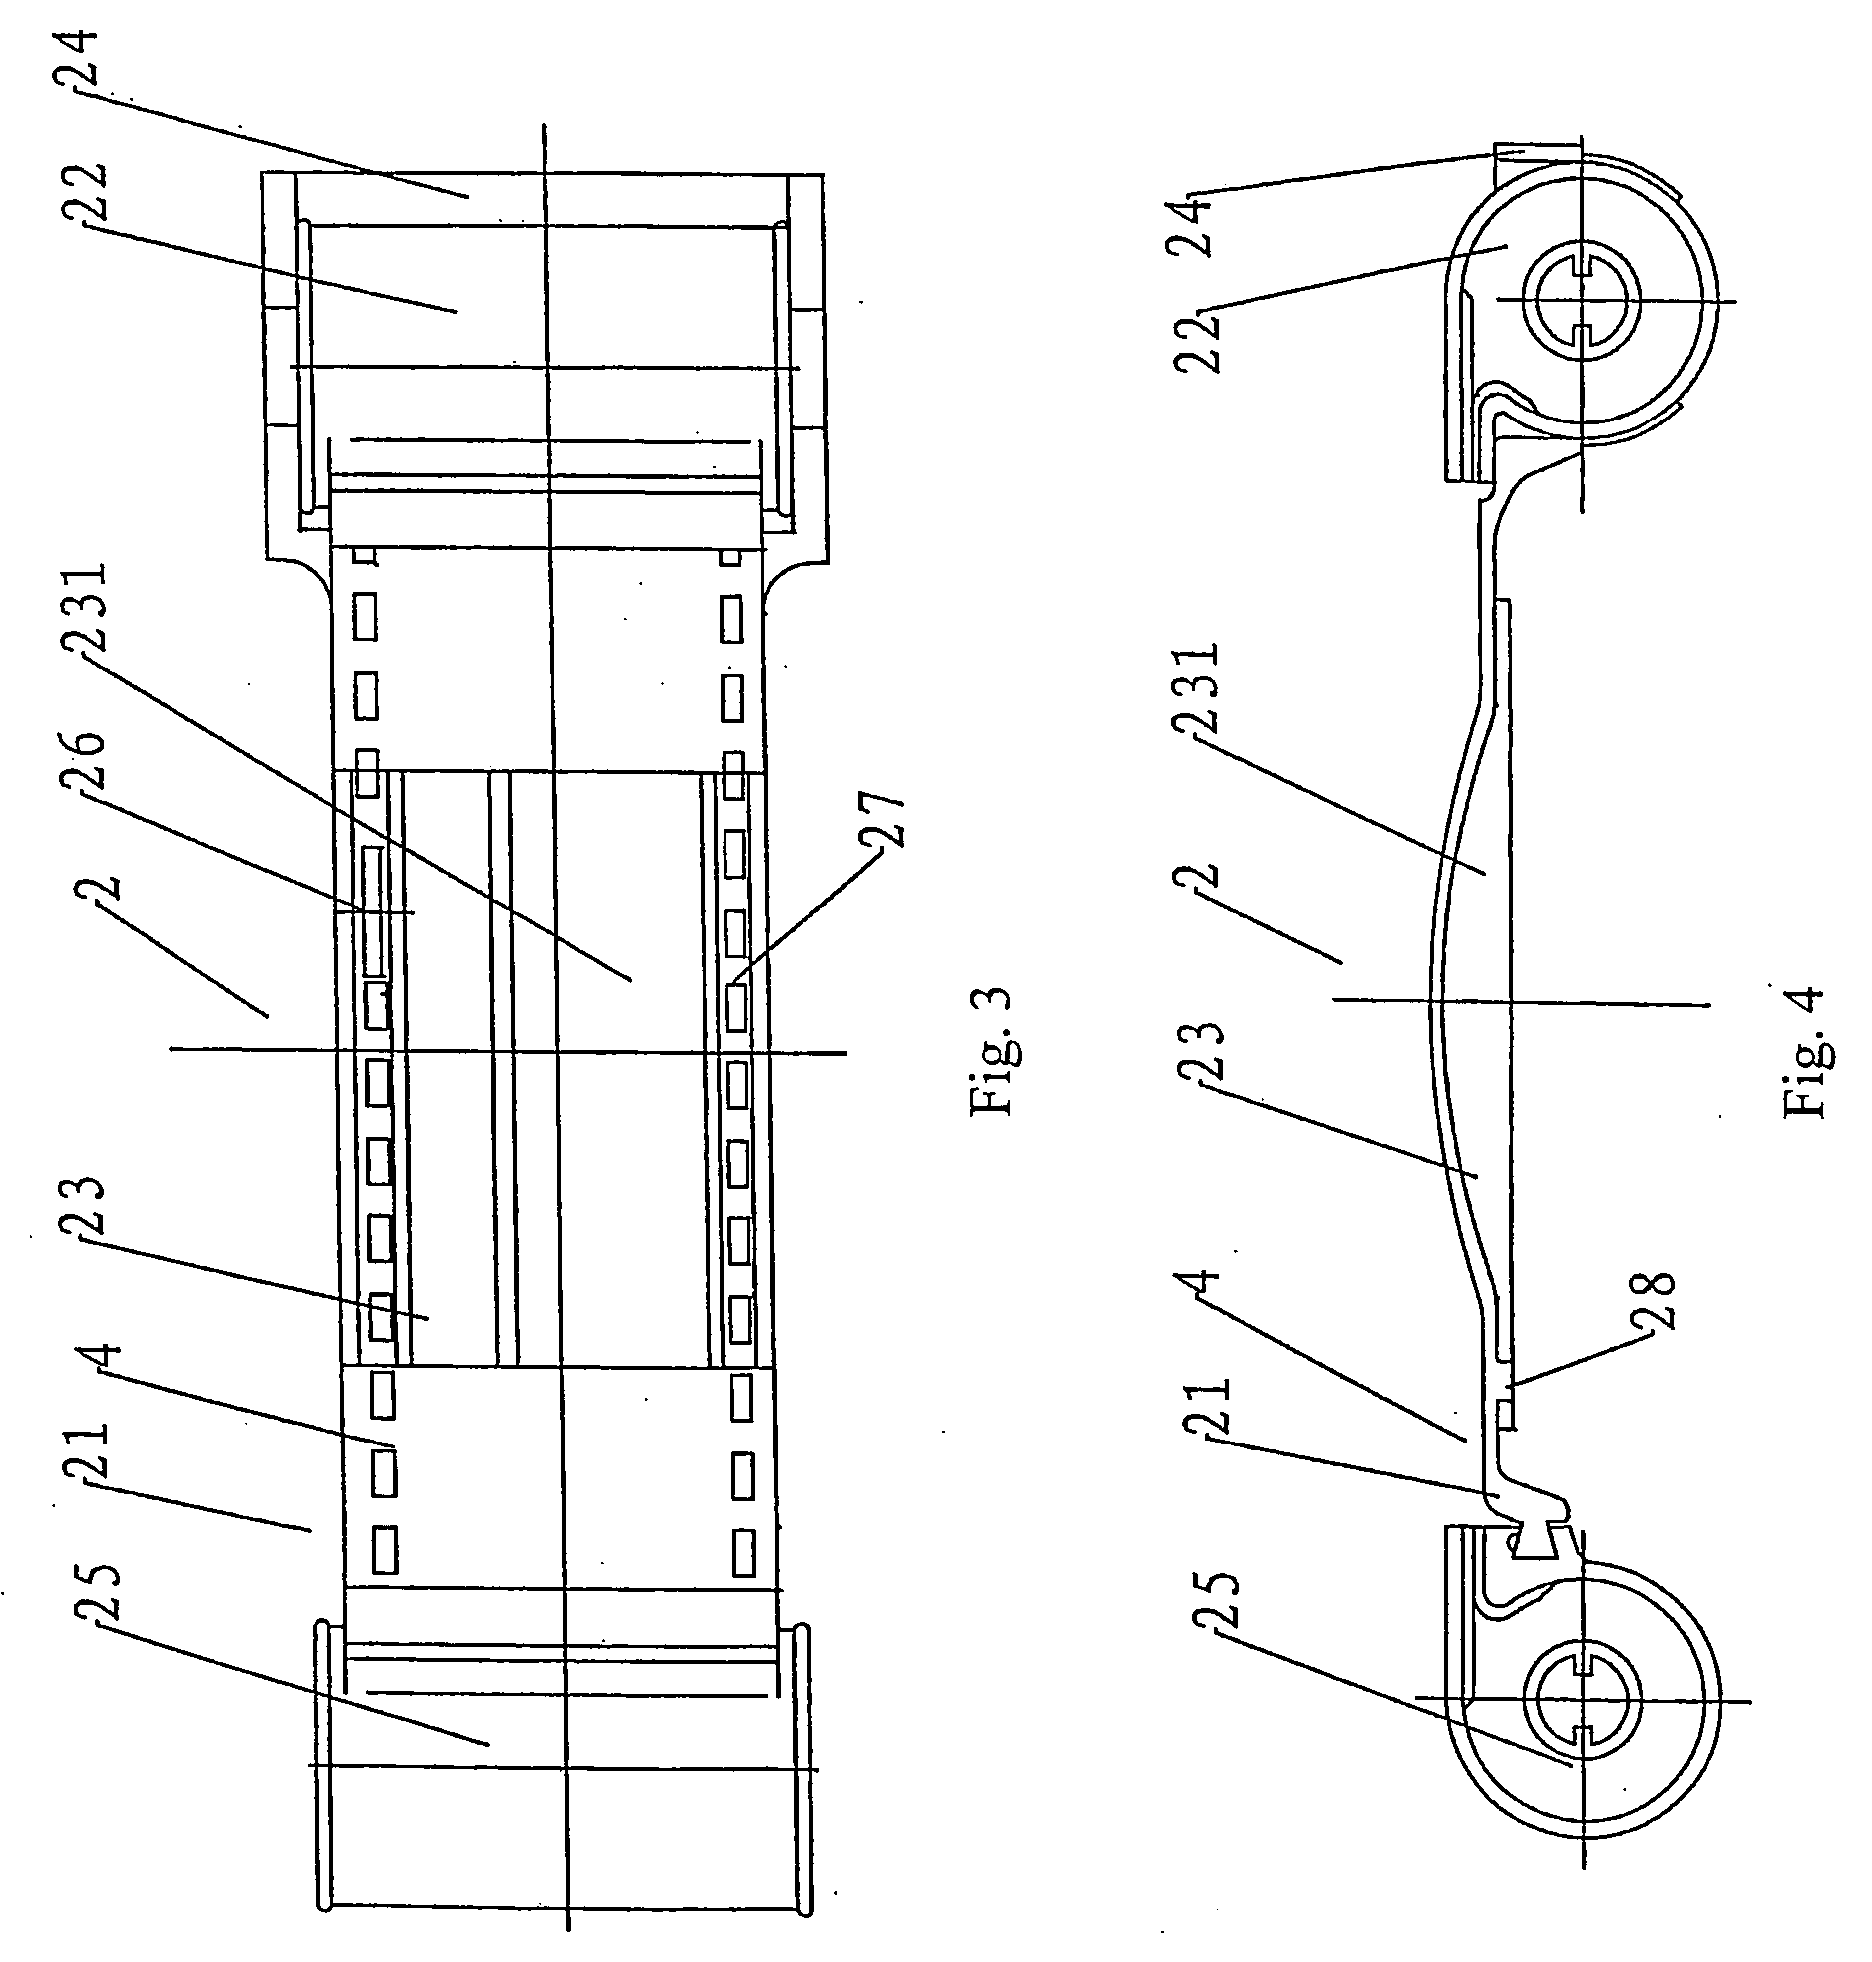 Imaging system for producing double exposure composite images and application thereof